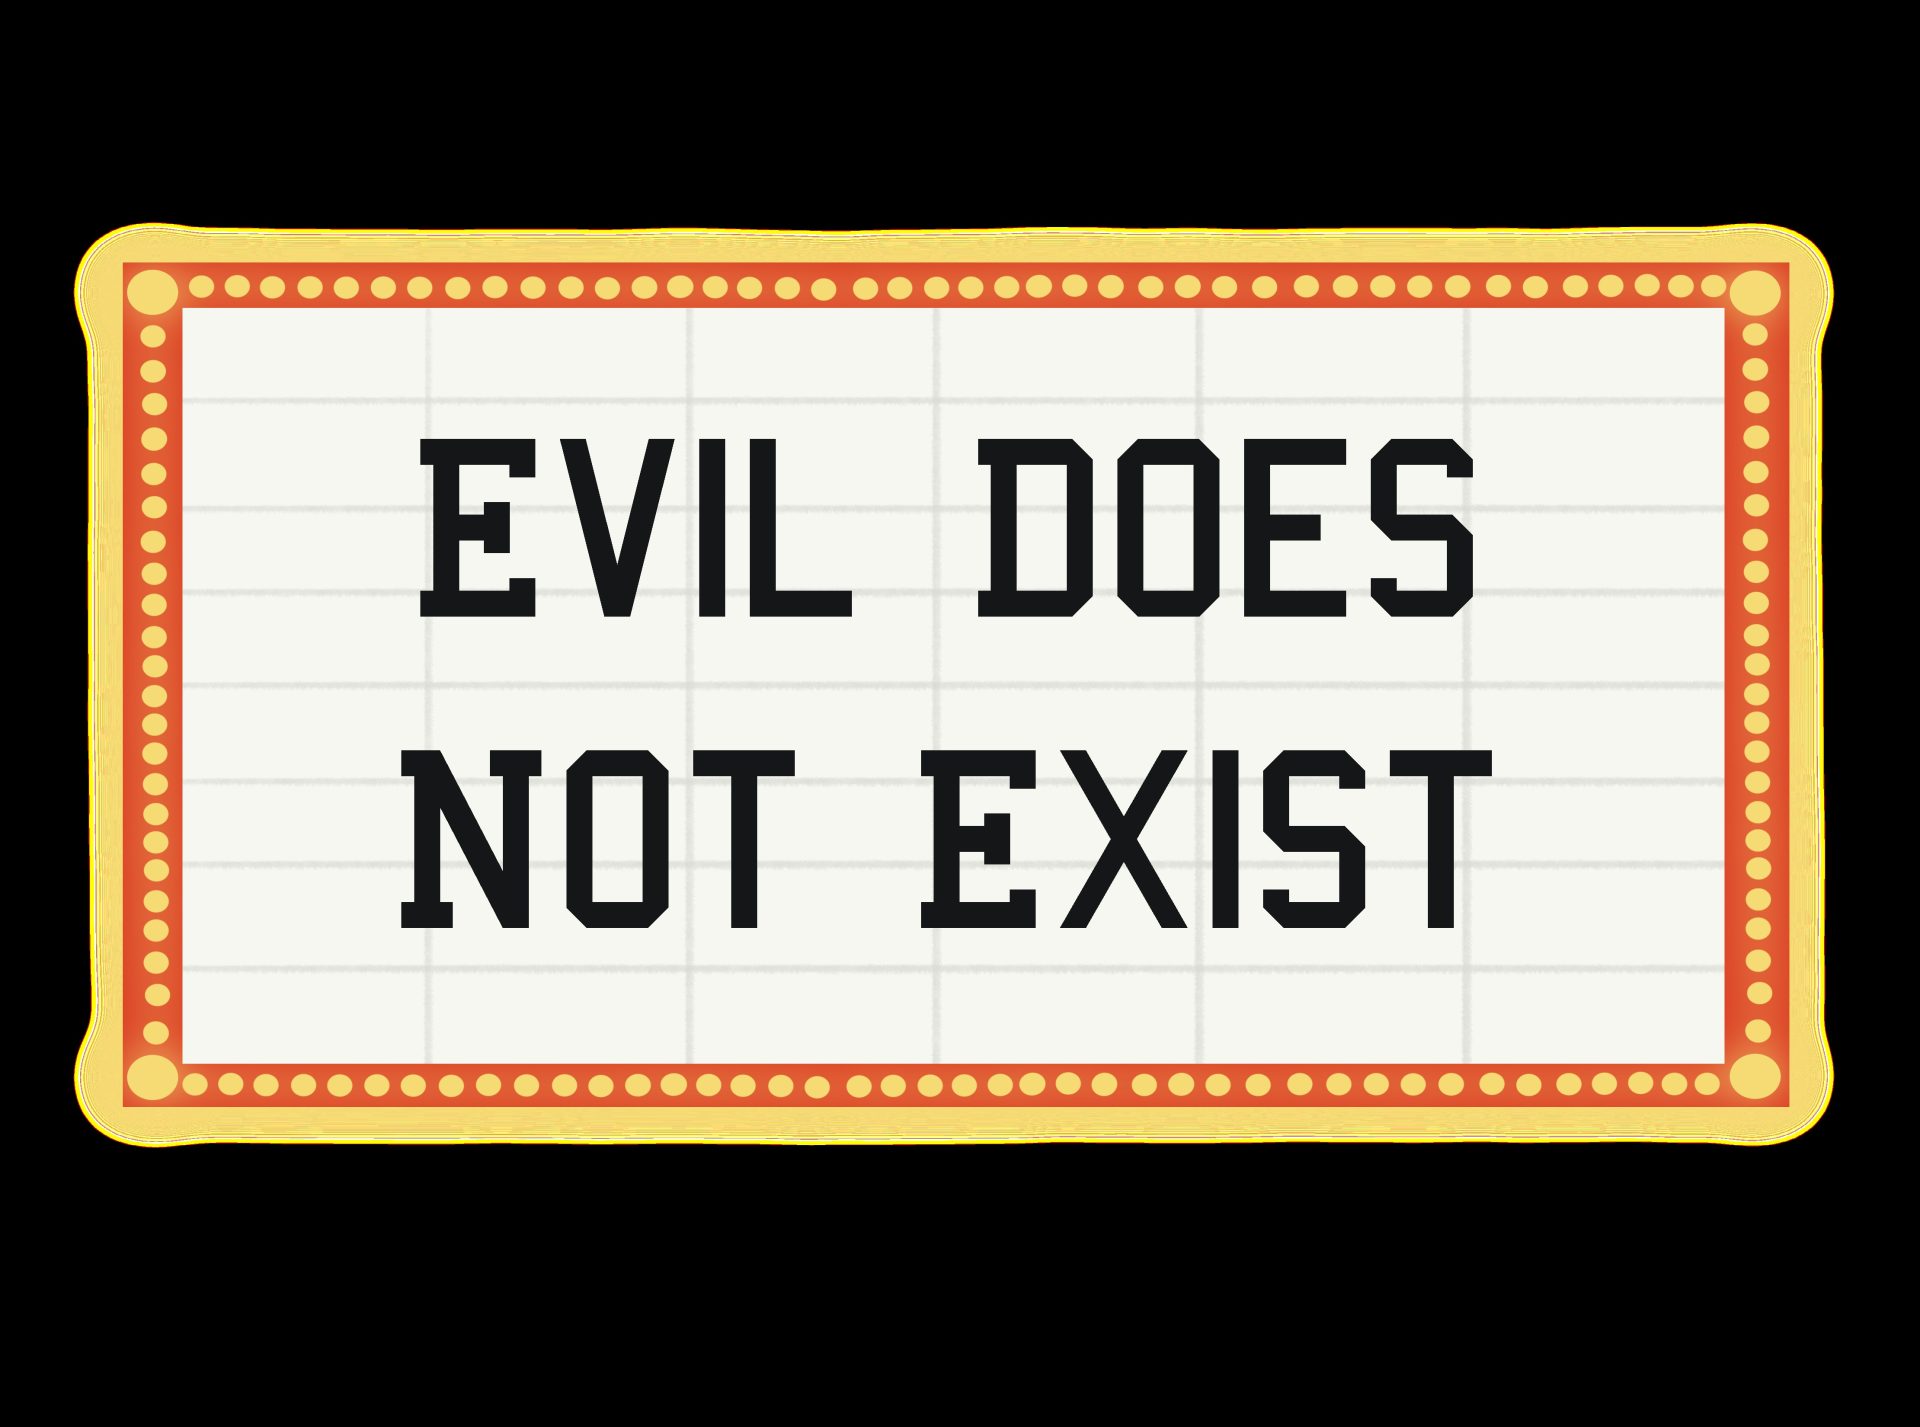 “Evil Does Not Exist”: A tranquil coasting across the vanity of mankind